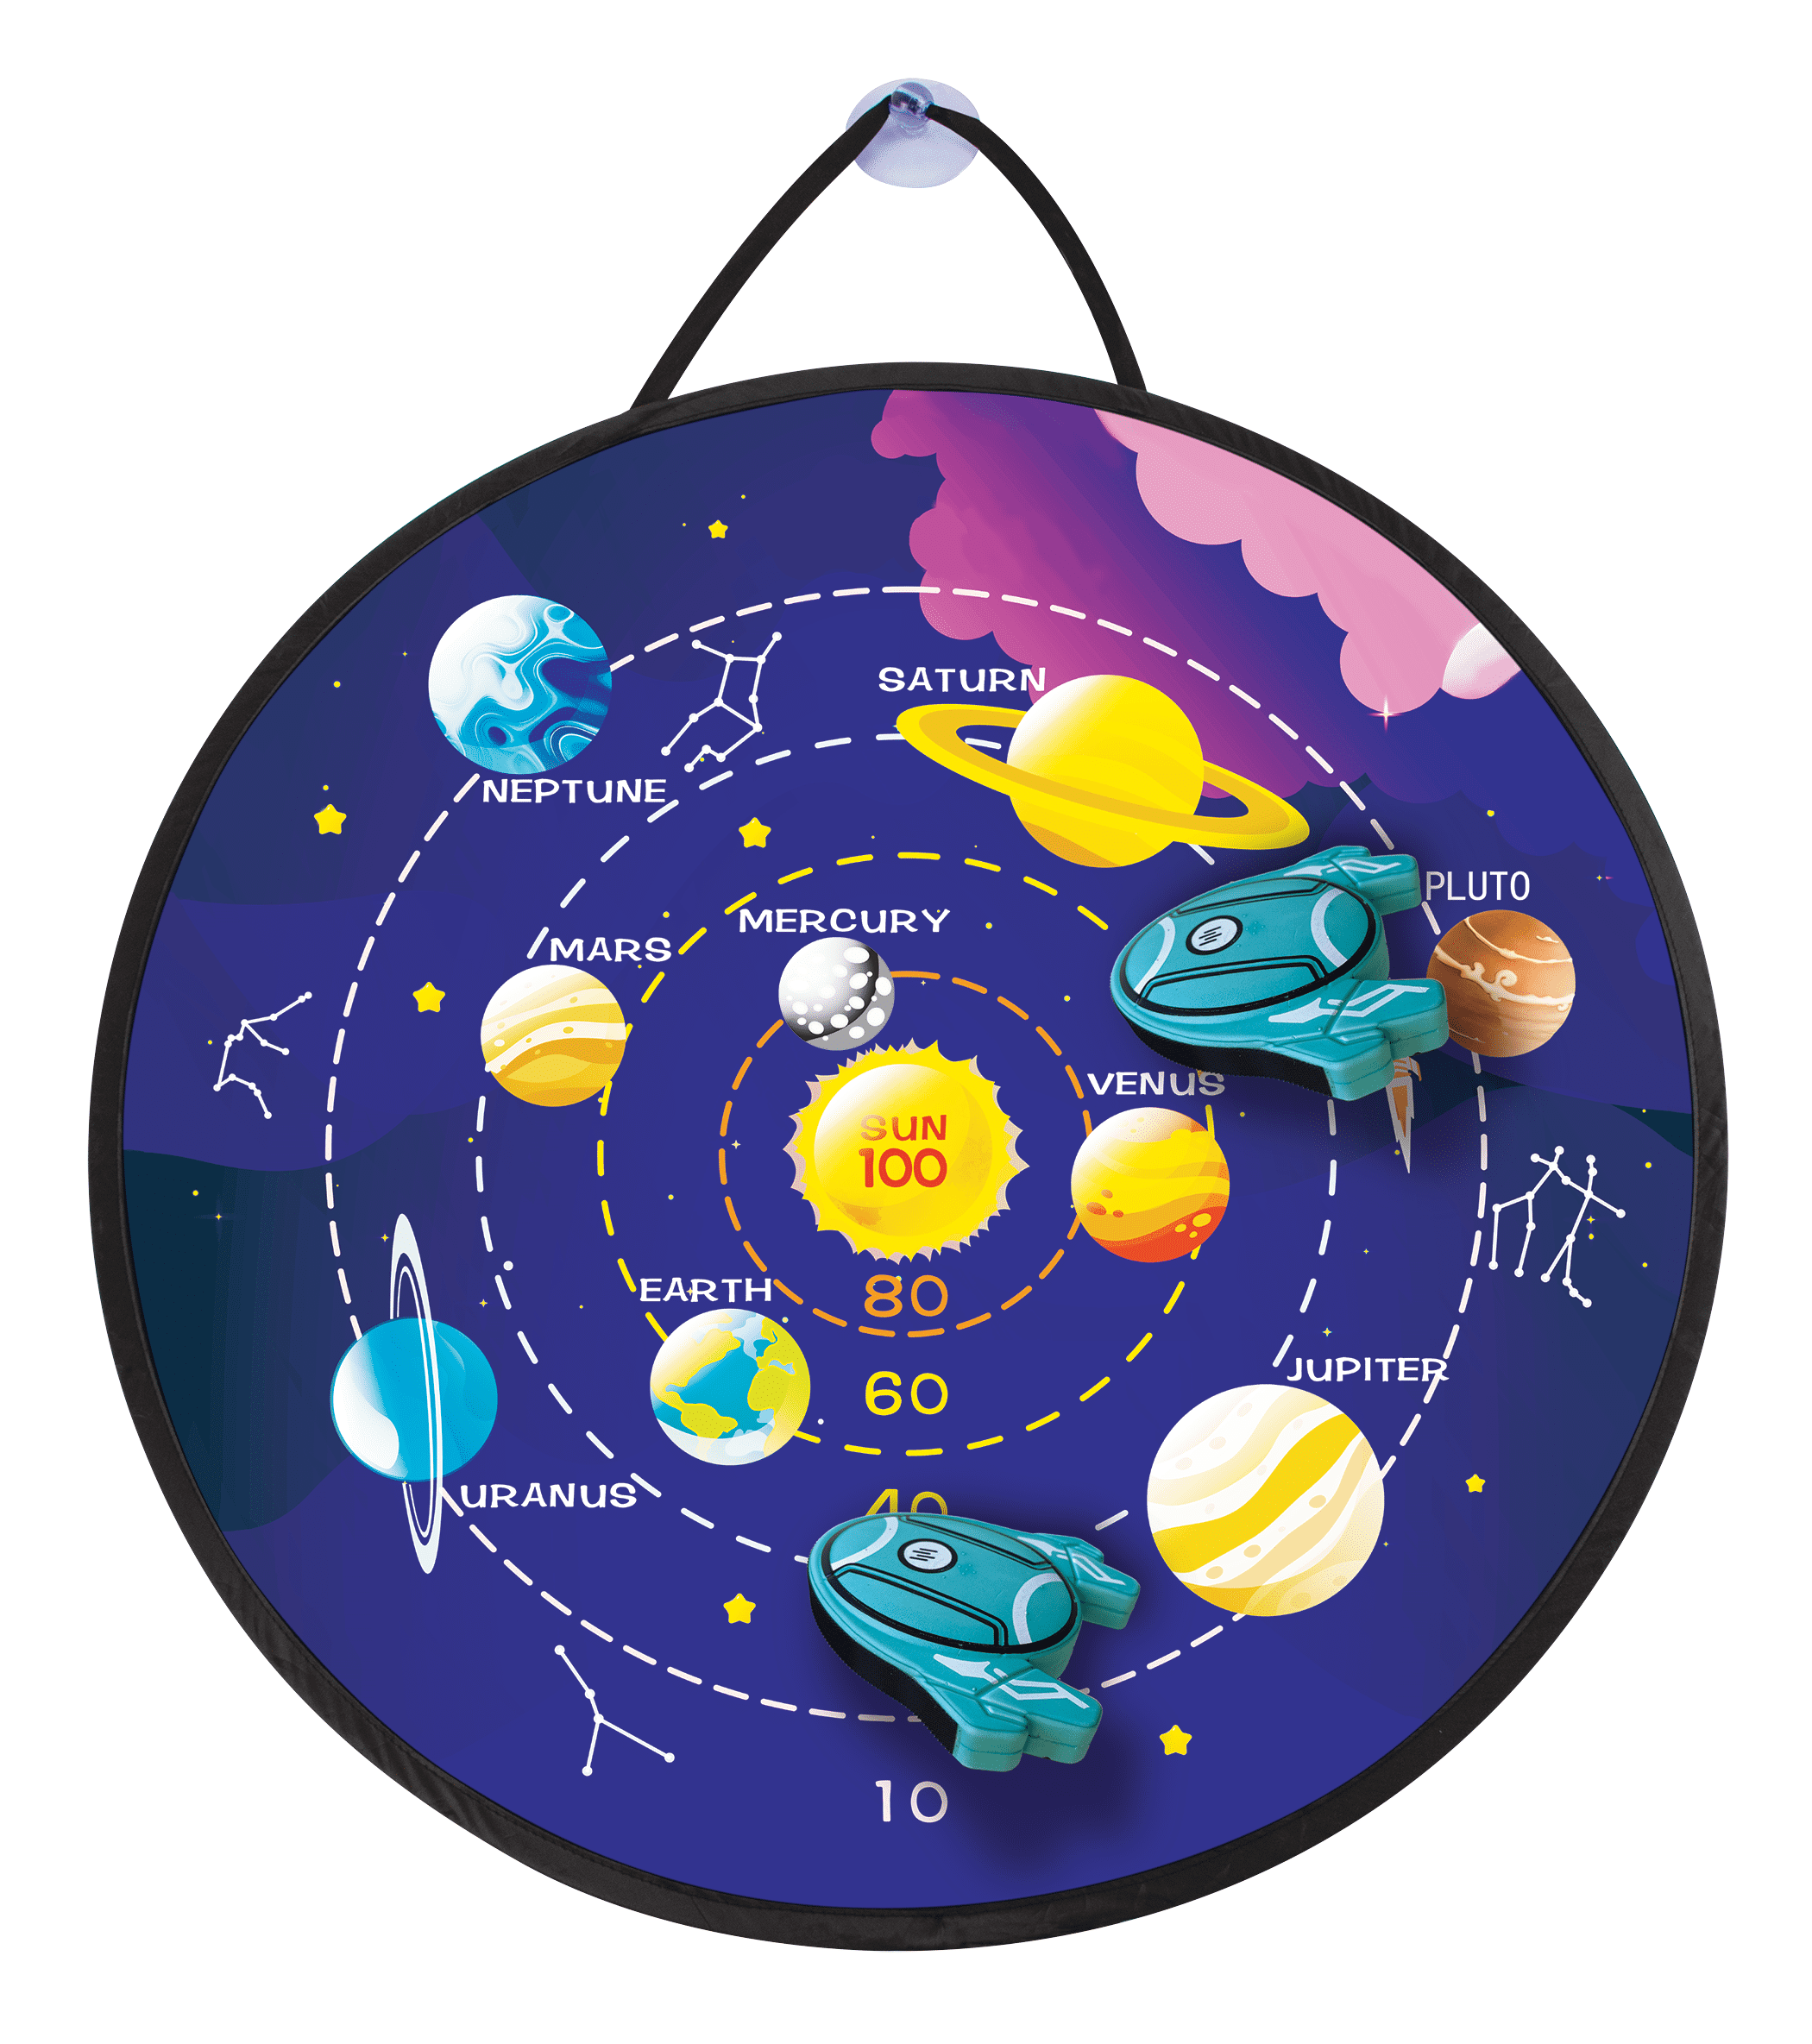 Planetary Rocket Target Toss Game, Fabric, Boys and Girls, Kids Sports,  Ages 3+ by MinnARK 